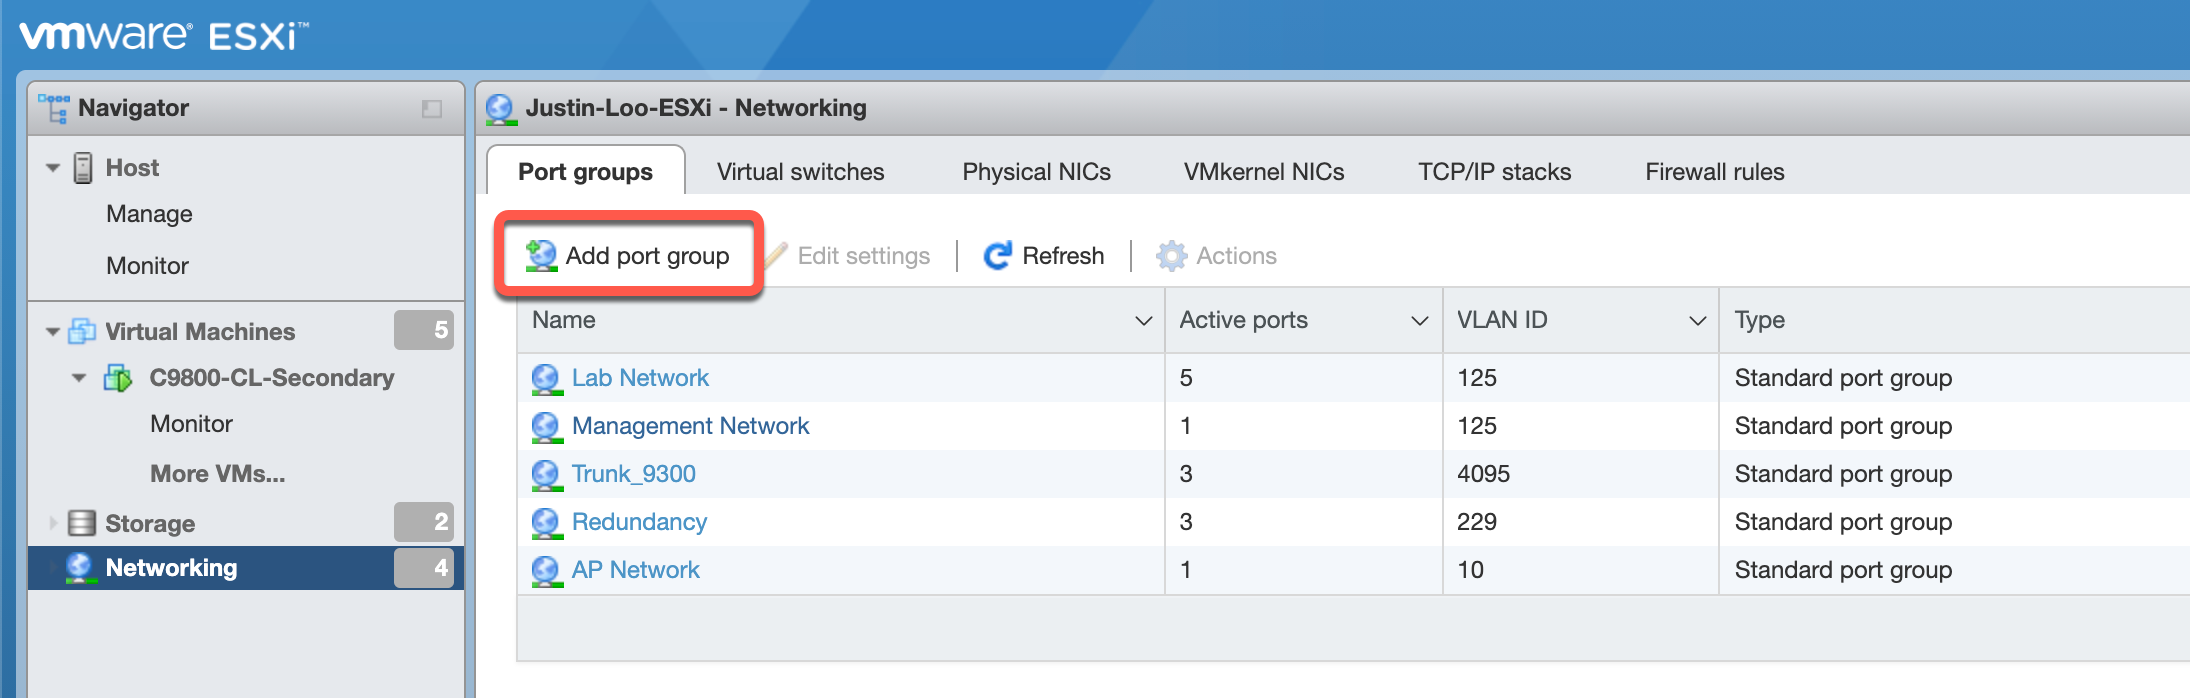 Networking > Port groups and click Add port group